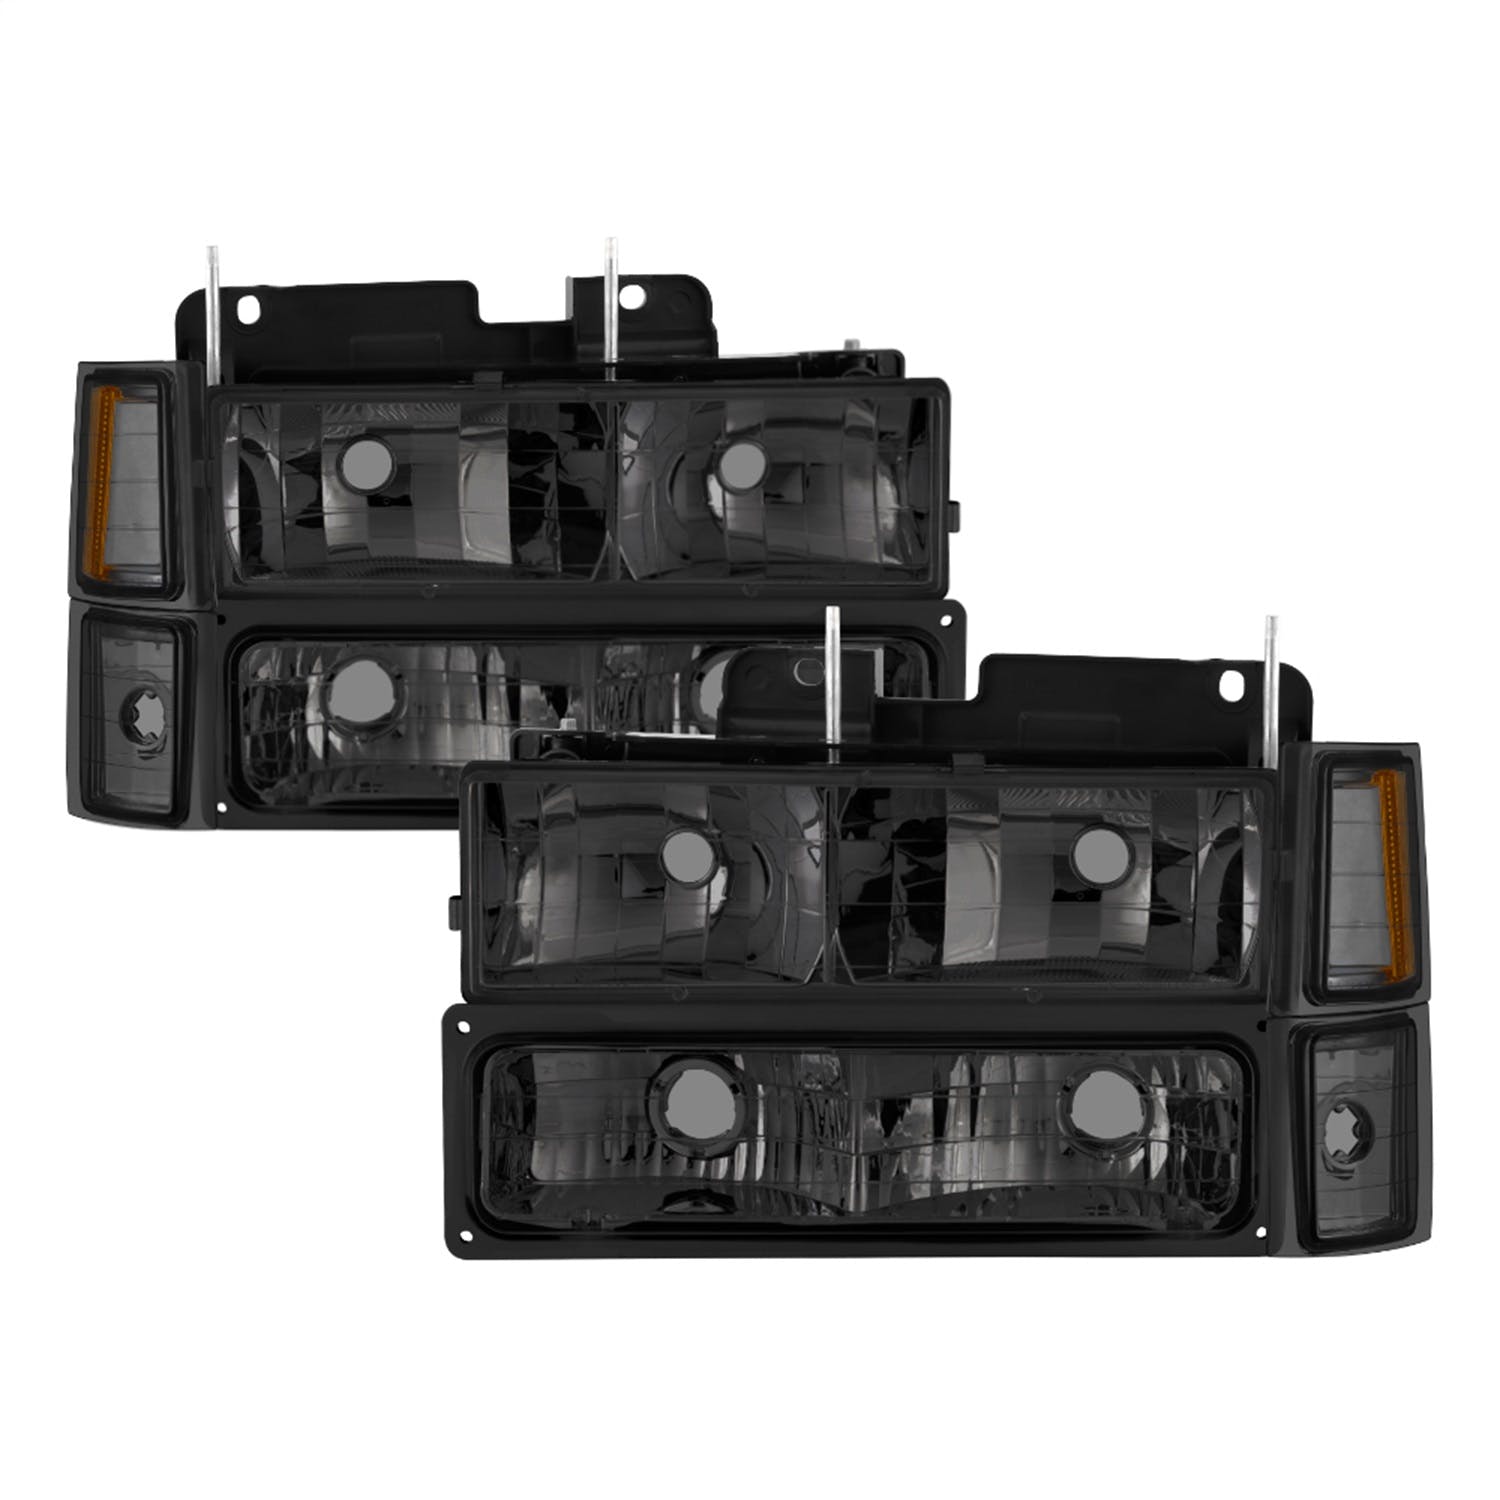 XTUNE POWER 5072238 Chevy C K Series 1500 2500 3500 94 98 Chevy Tahoe 95 99 Chevy Silverado 94 98 Chevy Suburban 94 98 Chevy Suburban 94 98 ( Not Compatible With Seal Beam Headlight ) Headlights with Corner and Parking Lights 8pcs sets Smoked